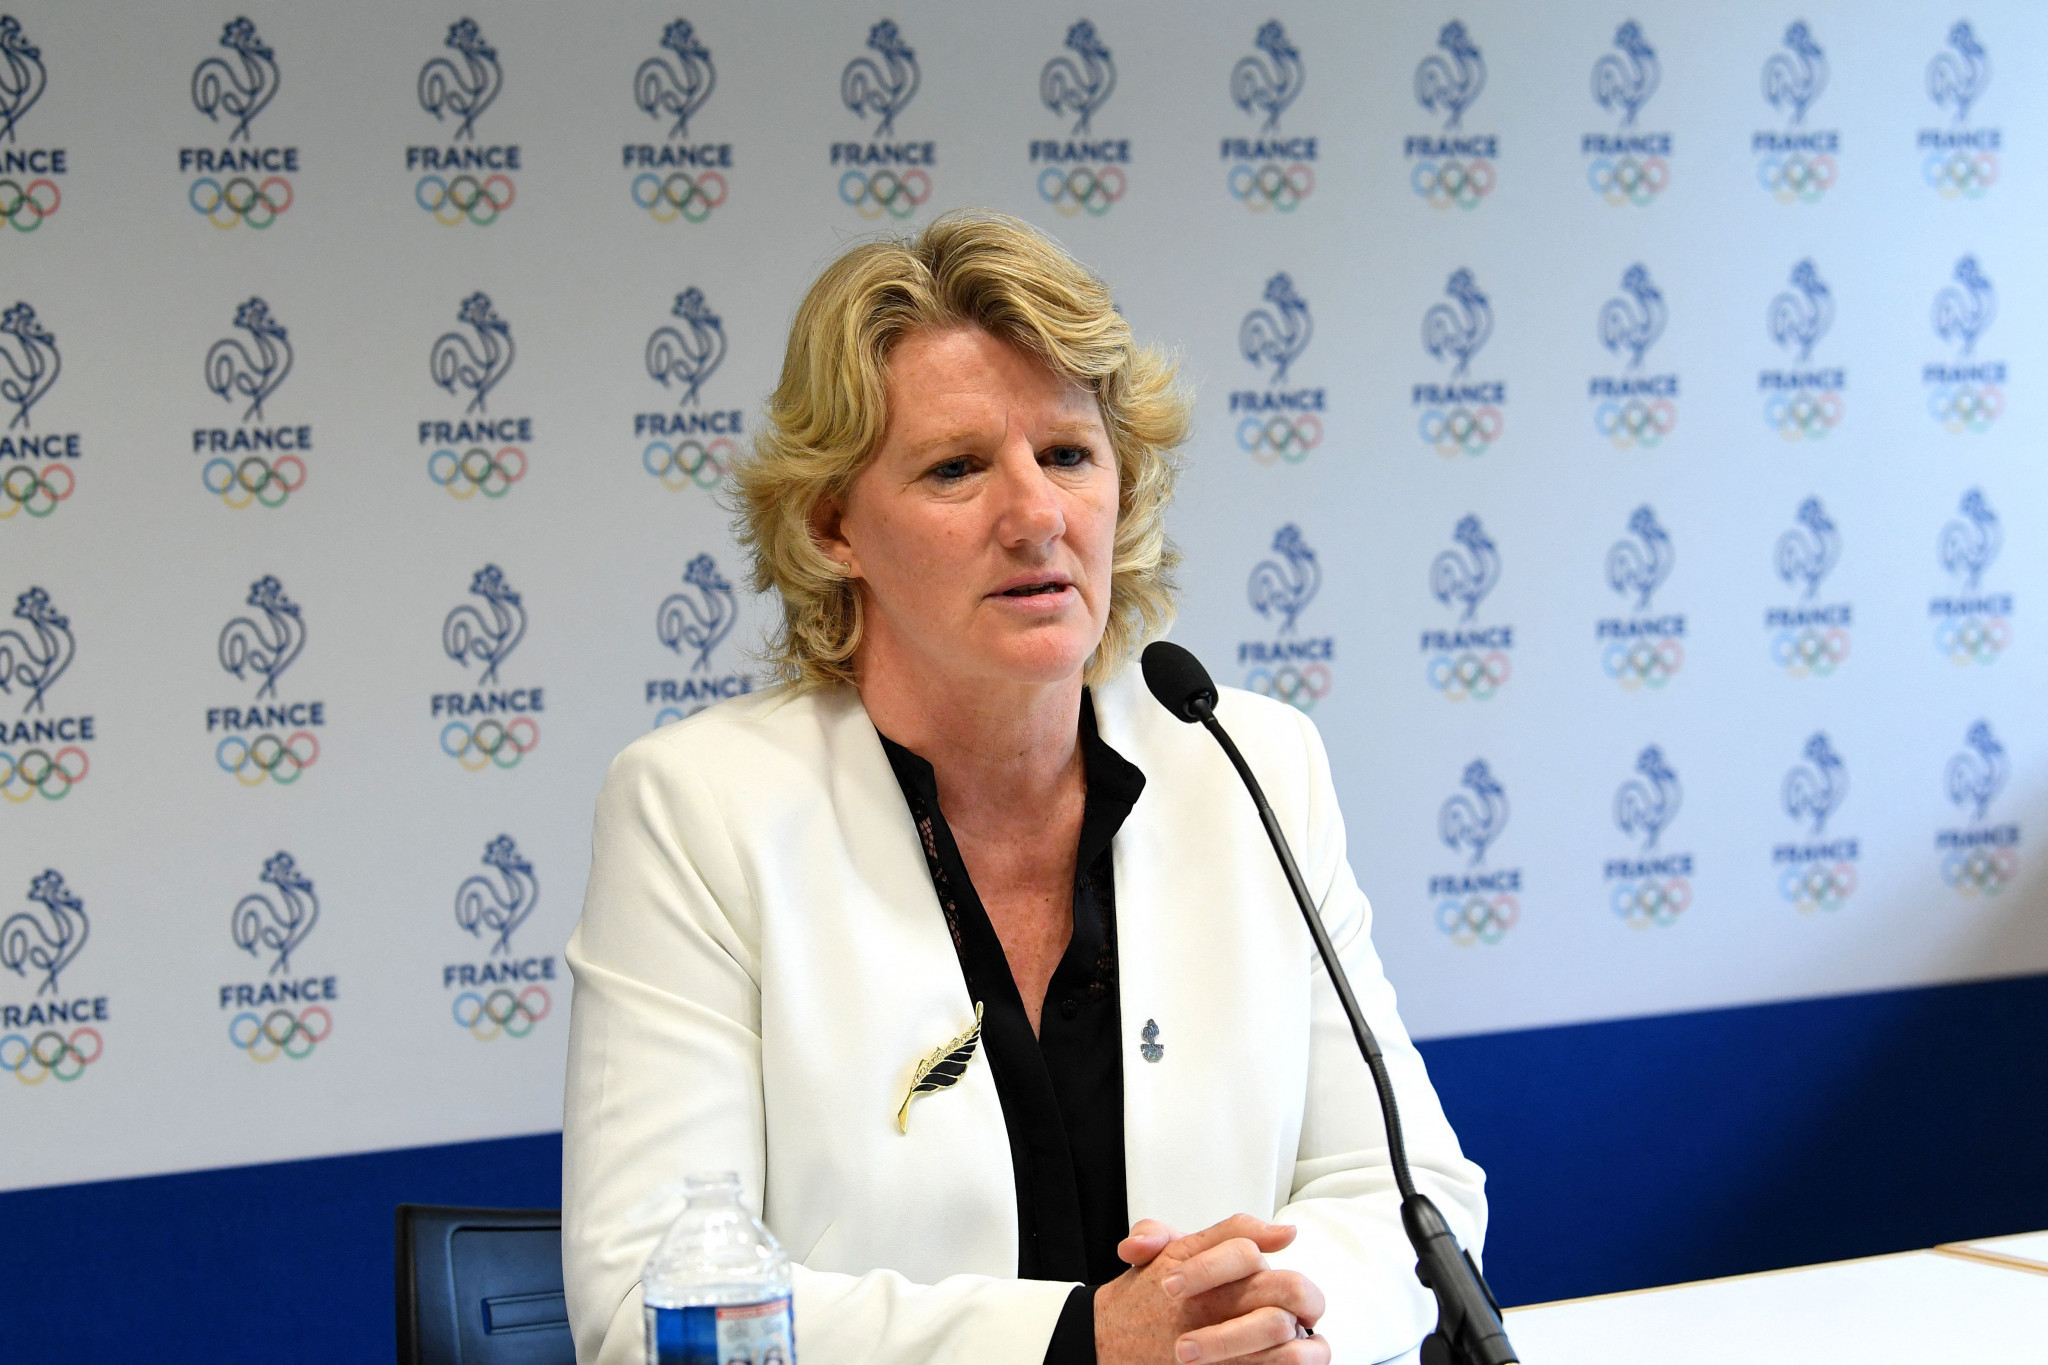 CNOSF President Brigitte Henriques has been forced to delay her journey to Beijing for the Winter Olympic Games following a positive COVID-19 test ©CNOSF